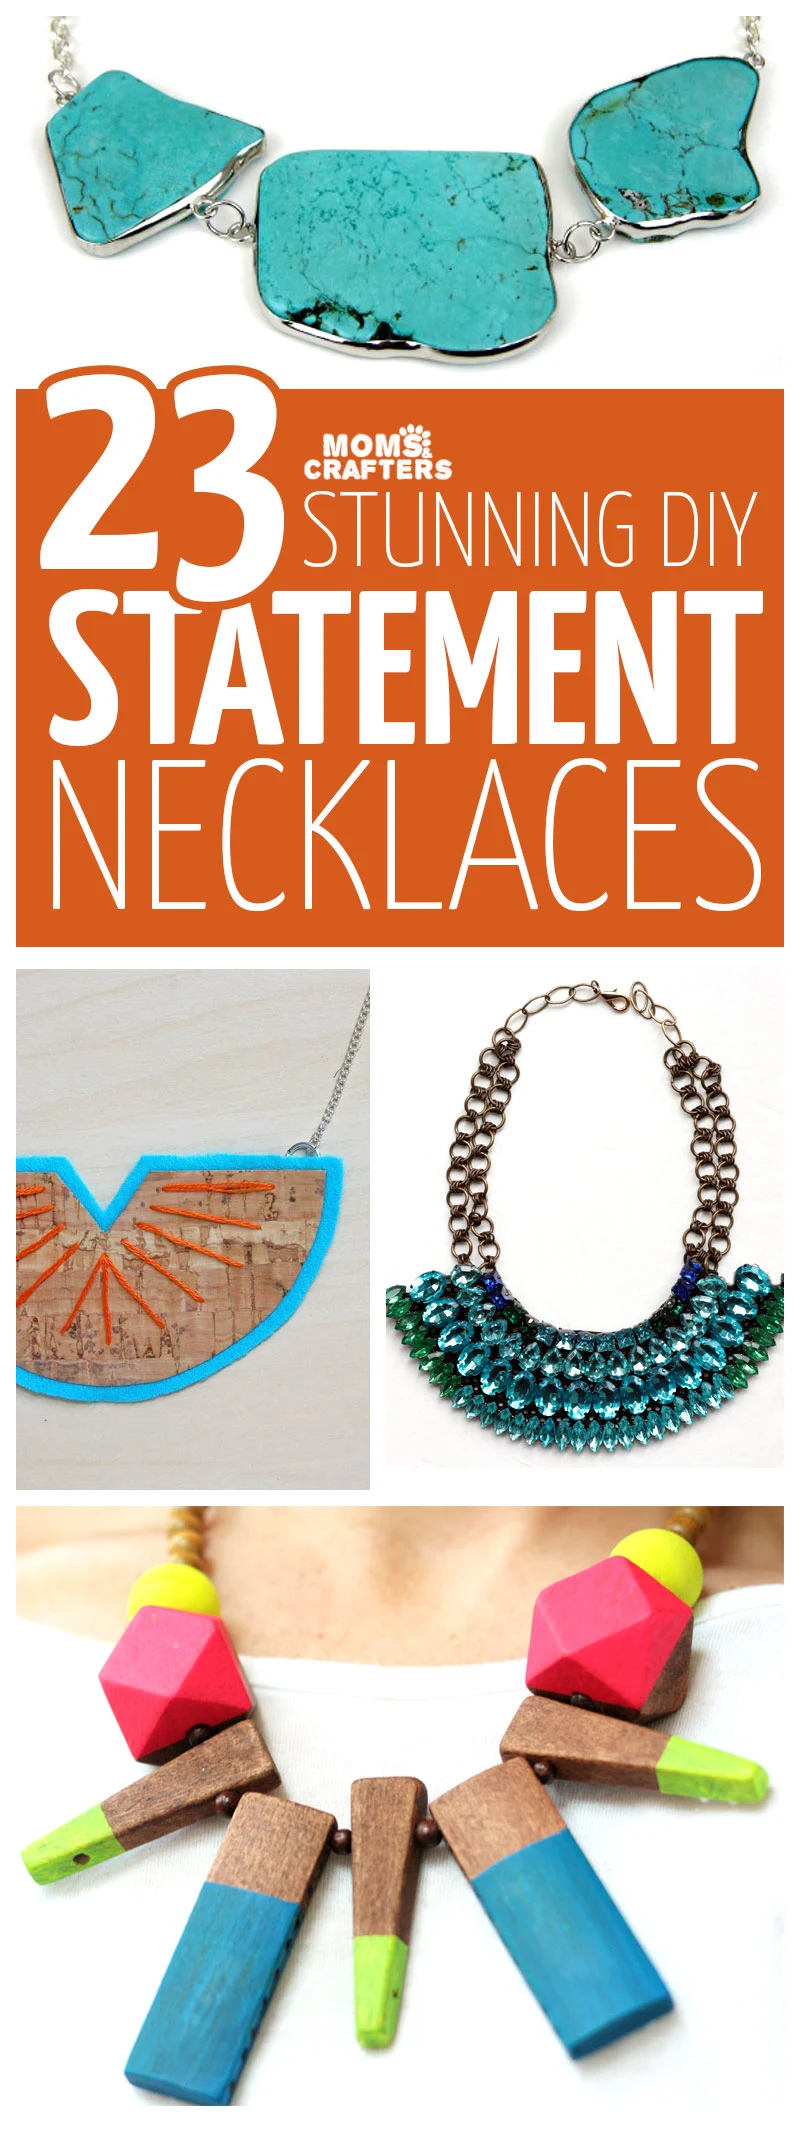 Click for 23 DIY statement necklace ideas for beginners through experts! These beautiful DIY necklaces jewelry making tutorials are perfect for teens and grown-ups too.